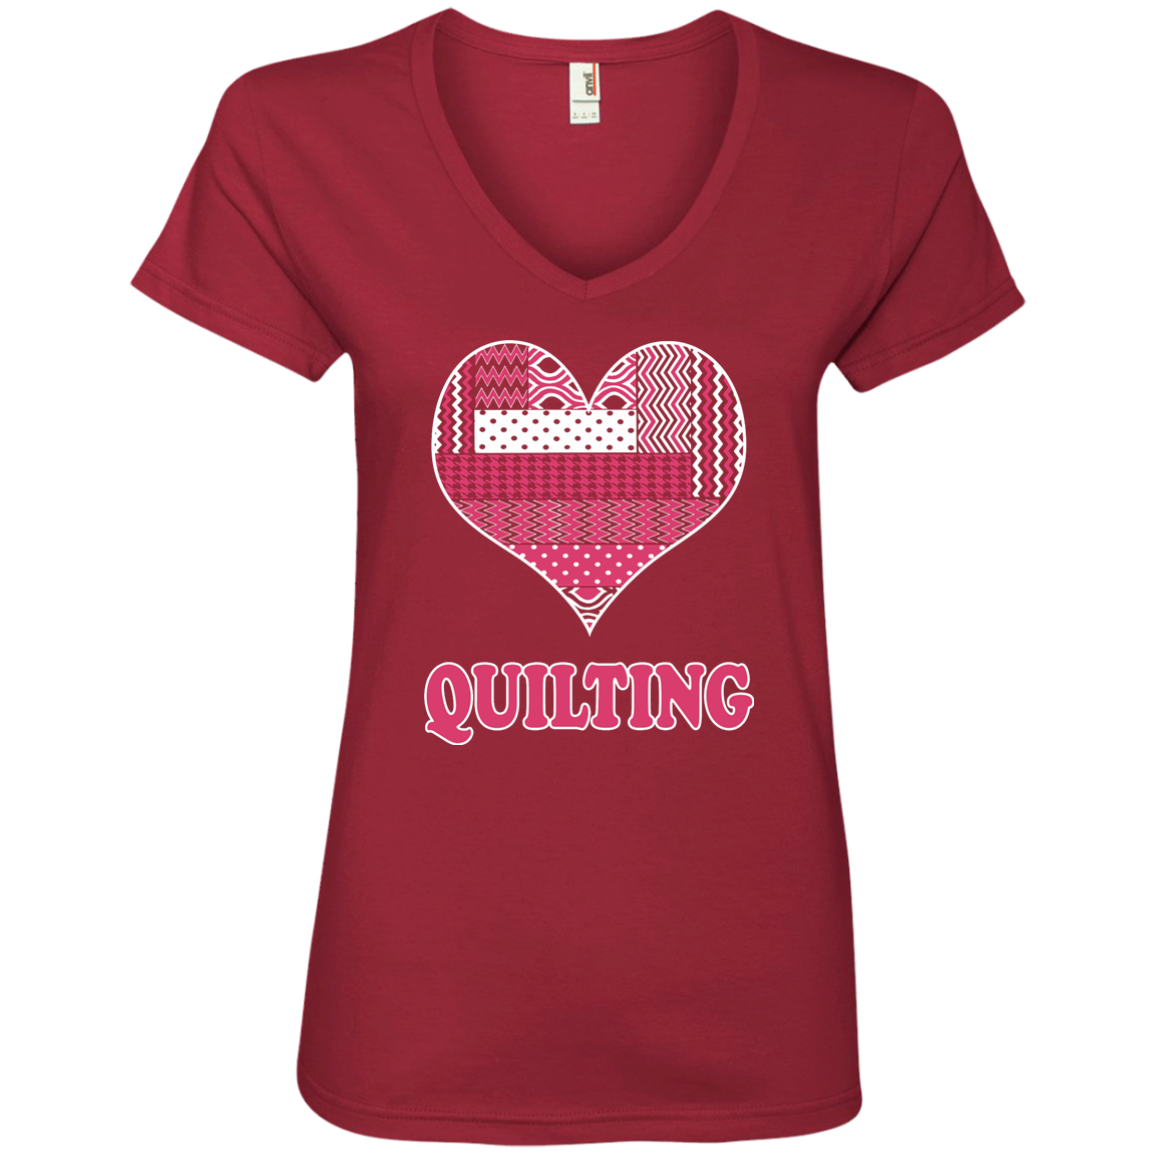 Heart Quilting Ladies V-neck Tee - Crafter4Life - 3